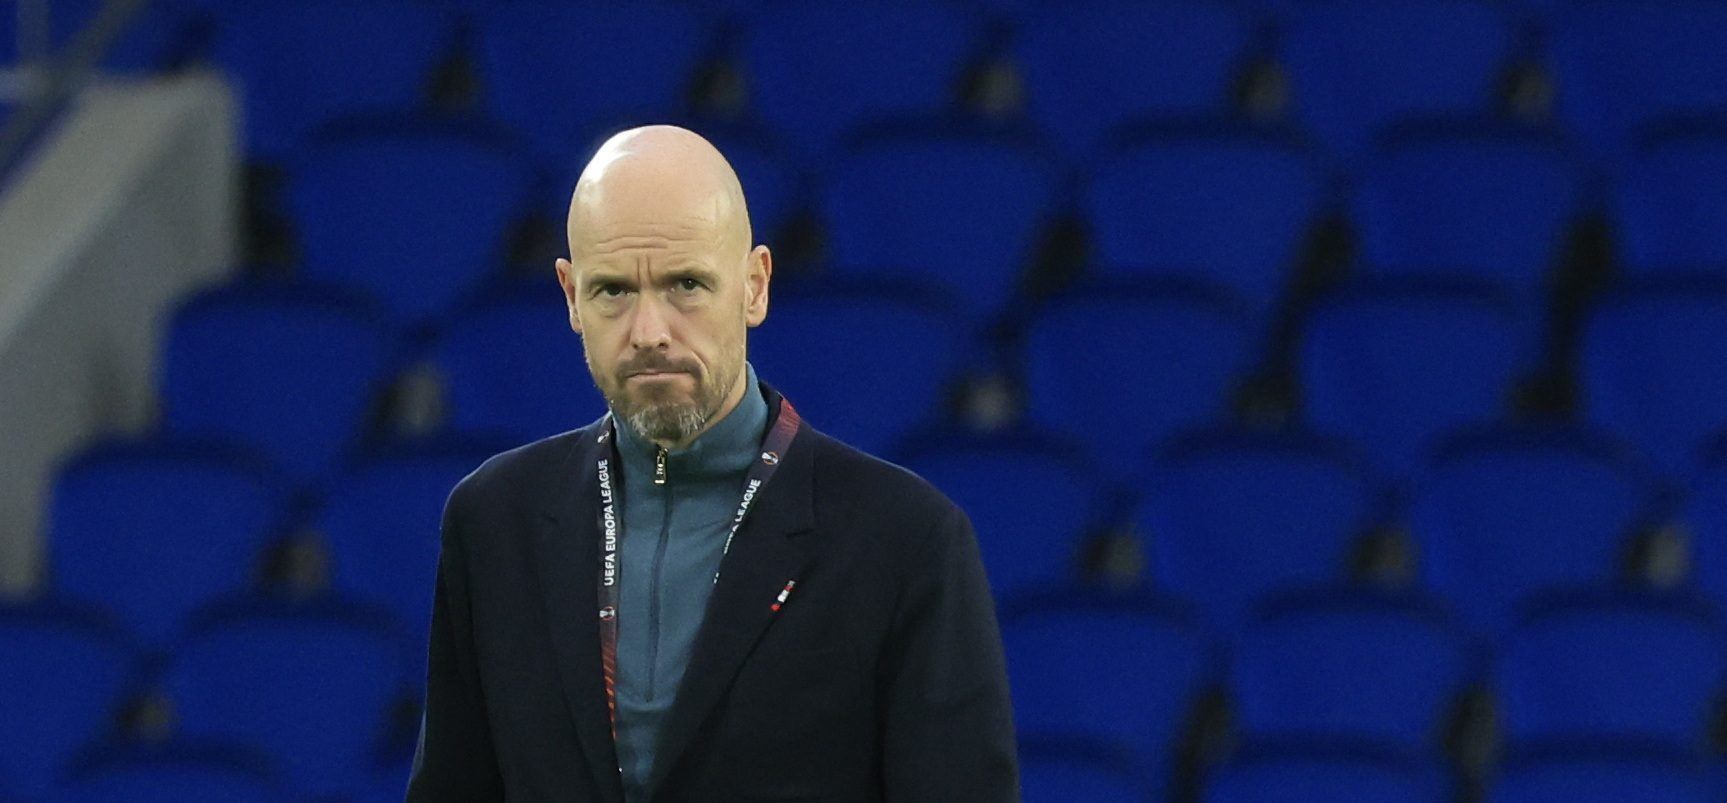 Soccer Football - Europa League - Group E - Real Sociedad v Manchester United - Reale Arena, San Sebastian, Spain - November 3, 2022 Manchester United manager Erik ten Hag before the match REUTERS/Vincent West